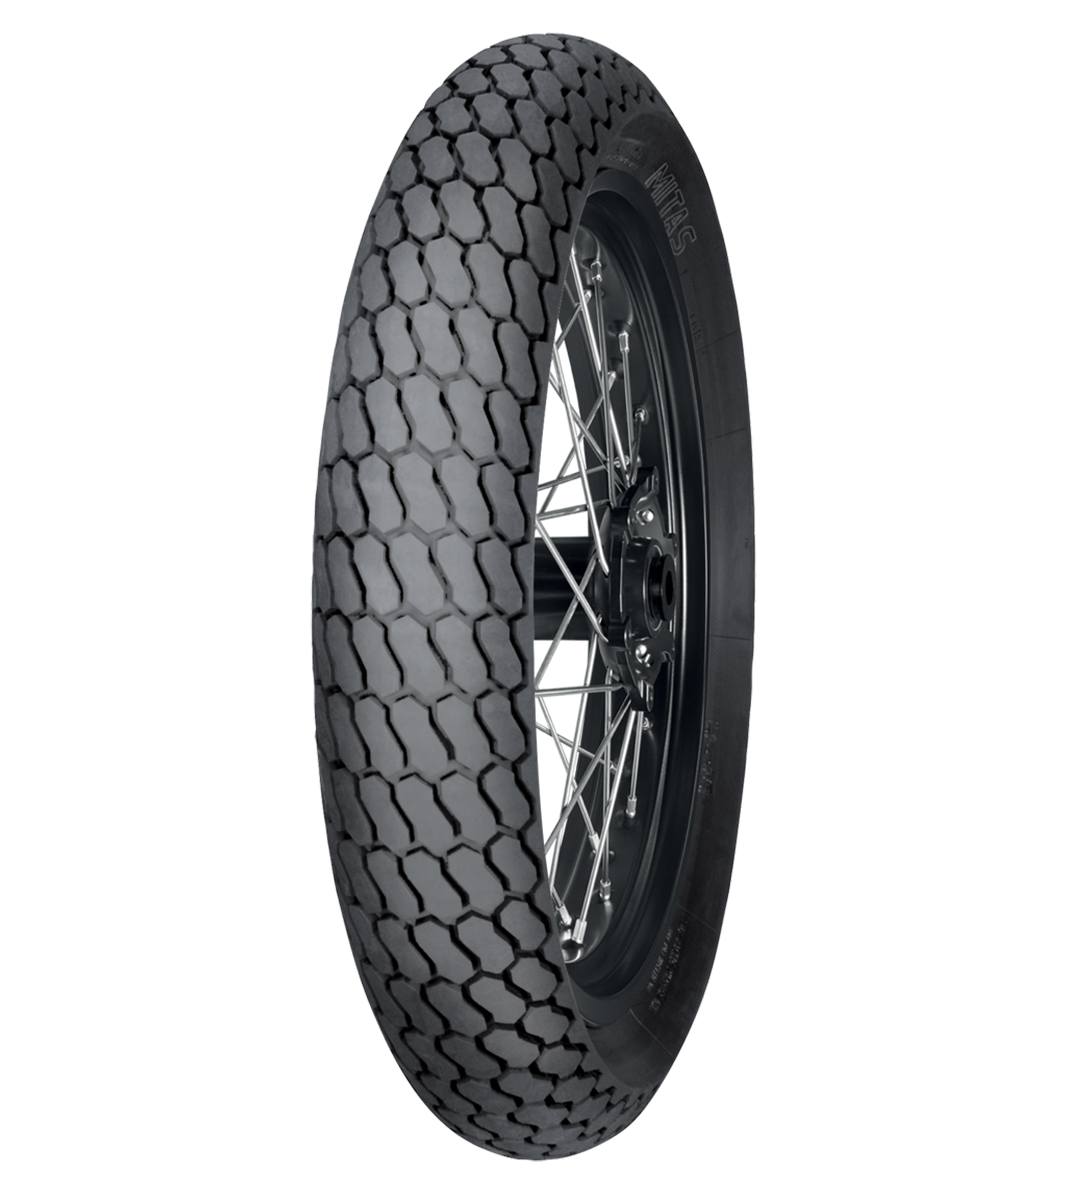 Mitas H-18 FLAT TRACK 130/80-19 (27x7-19) Flat Track Off-Road NHS 2 Green Tube Front Tire, 223408, 130/80-19, Flat Track, Front, H-18 Flat Track, Off-Road, Tires - Imported and distributed in North &amp; South America by Lindeco Genuine Powersports - Premier Powersports Equipment and Accessories for Motorcycle Enthusiasts, Professional Riders and Dealers.